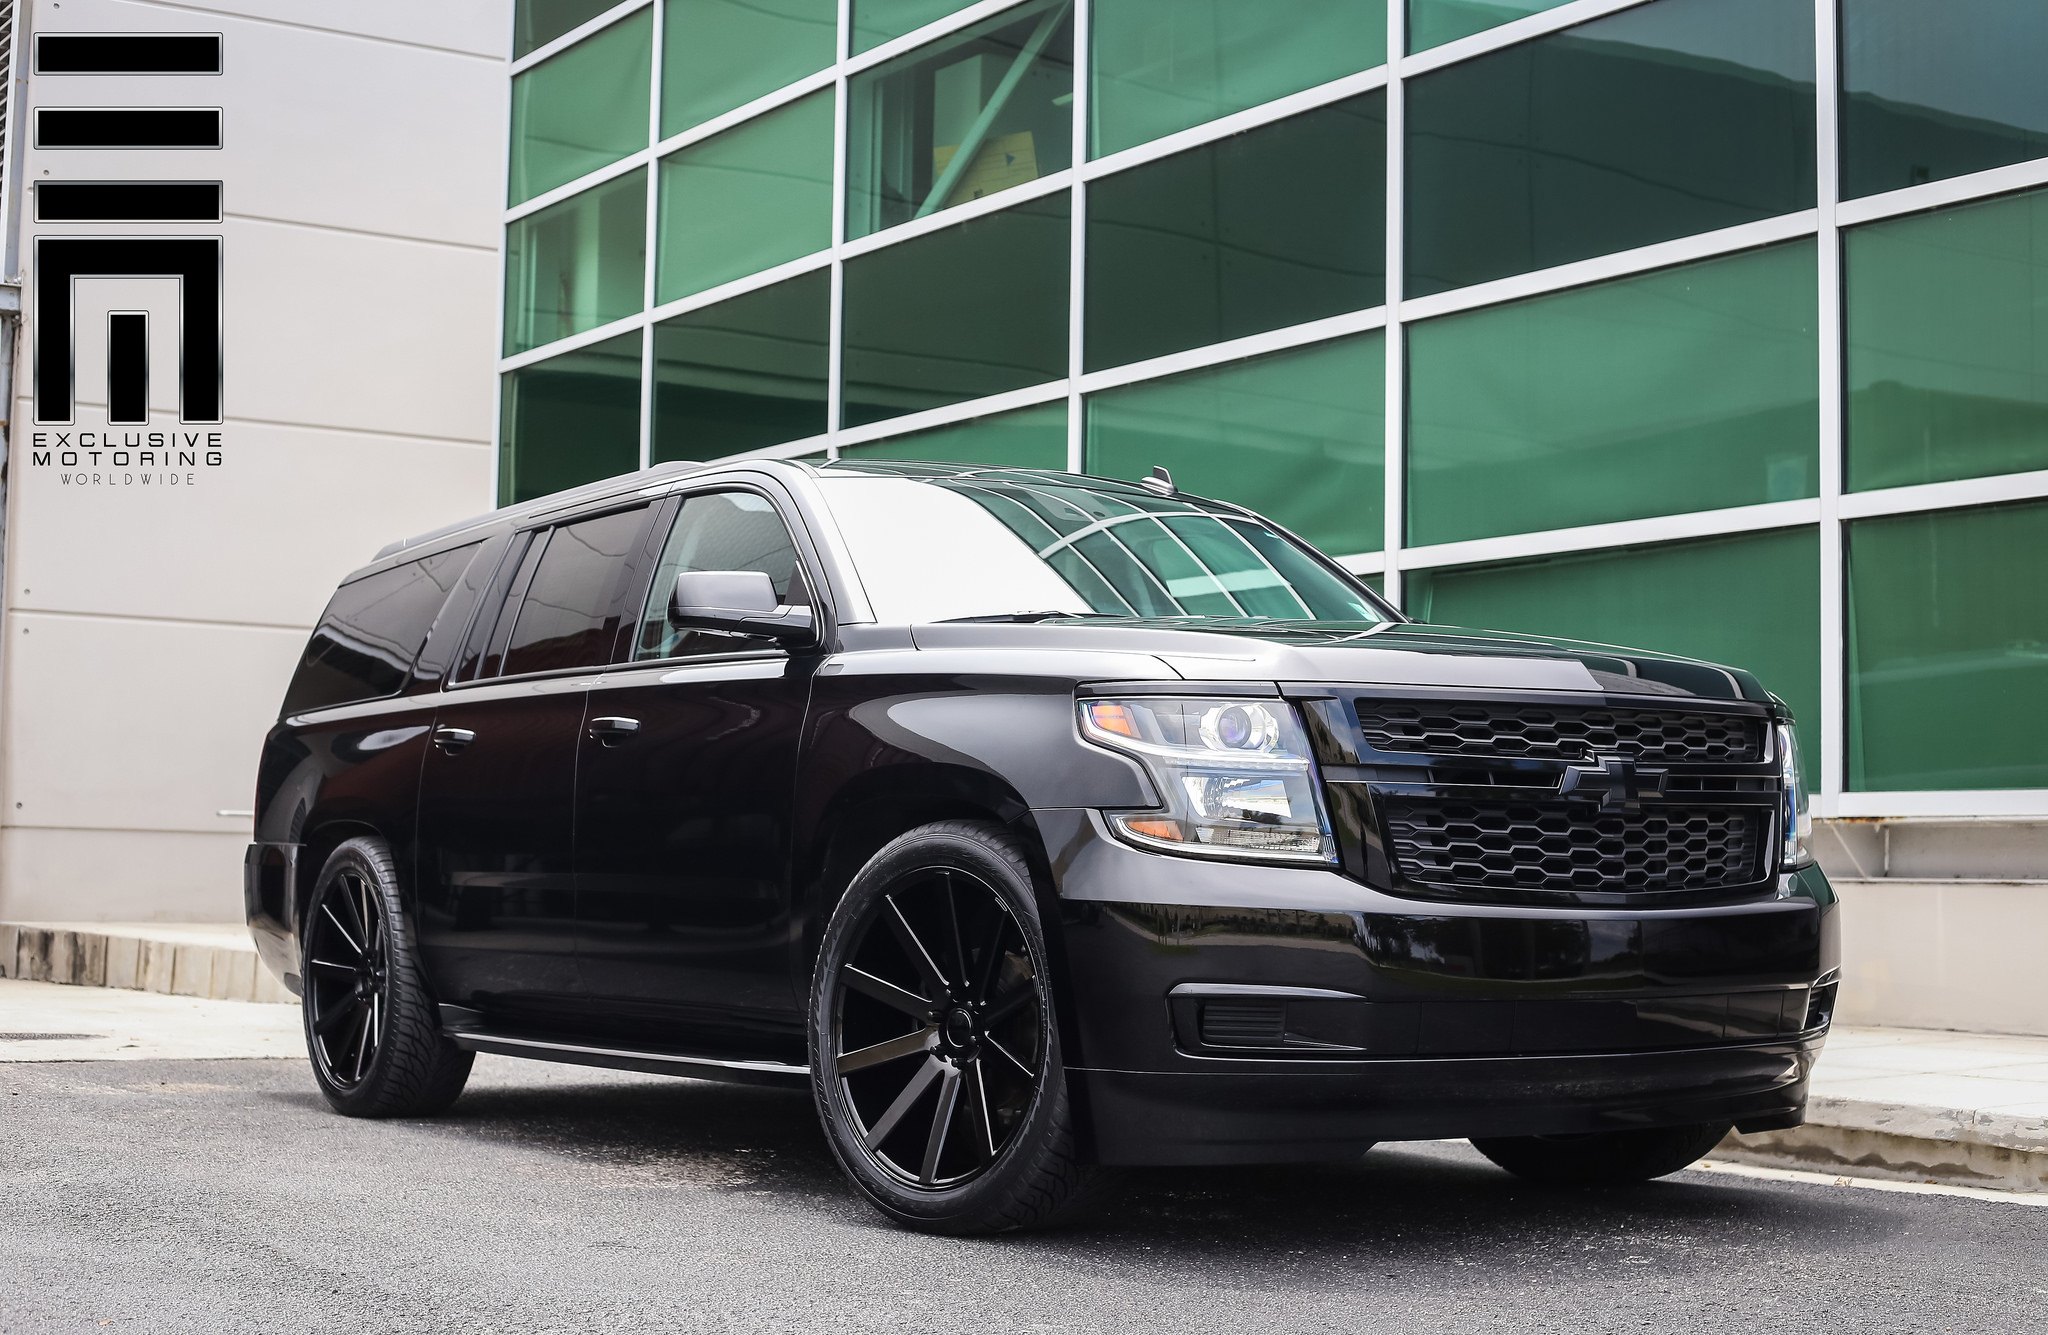 All Black Chevy Suburban on Custom Wheels - Photo by Exclusive Motoring